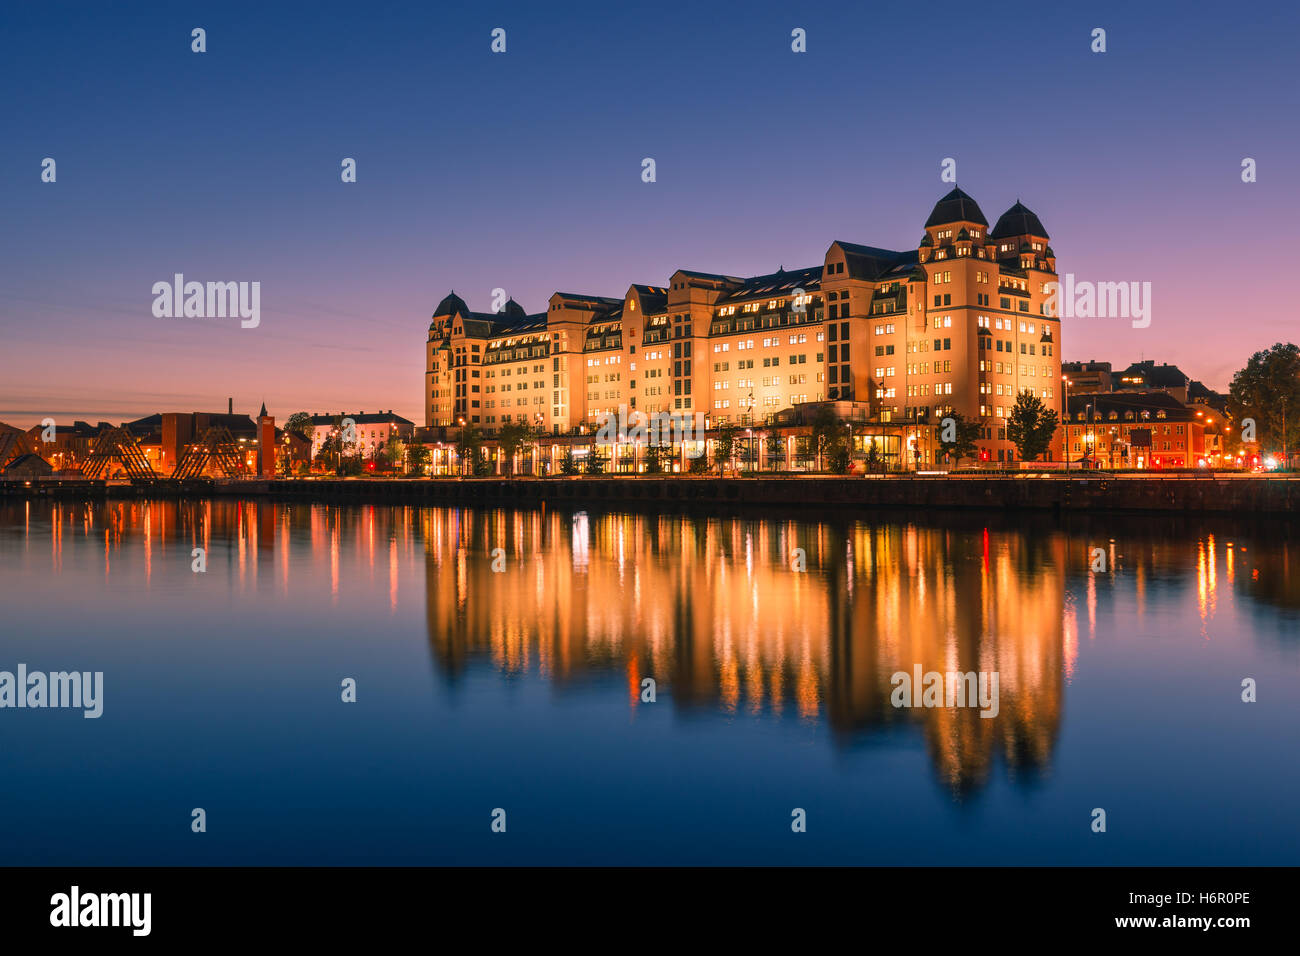 Blue hour in Oslo with the Eniro Norge building, Norway Stock Photo